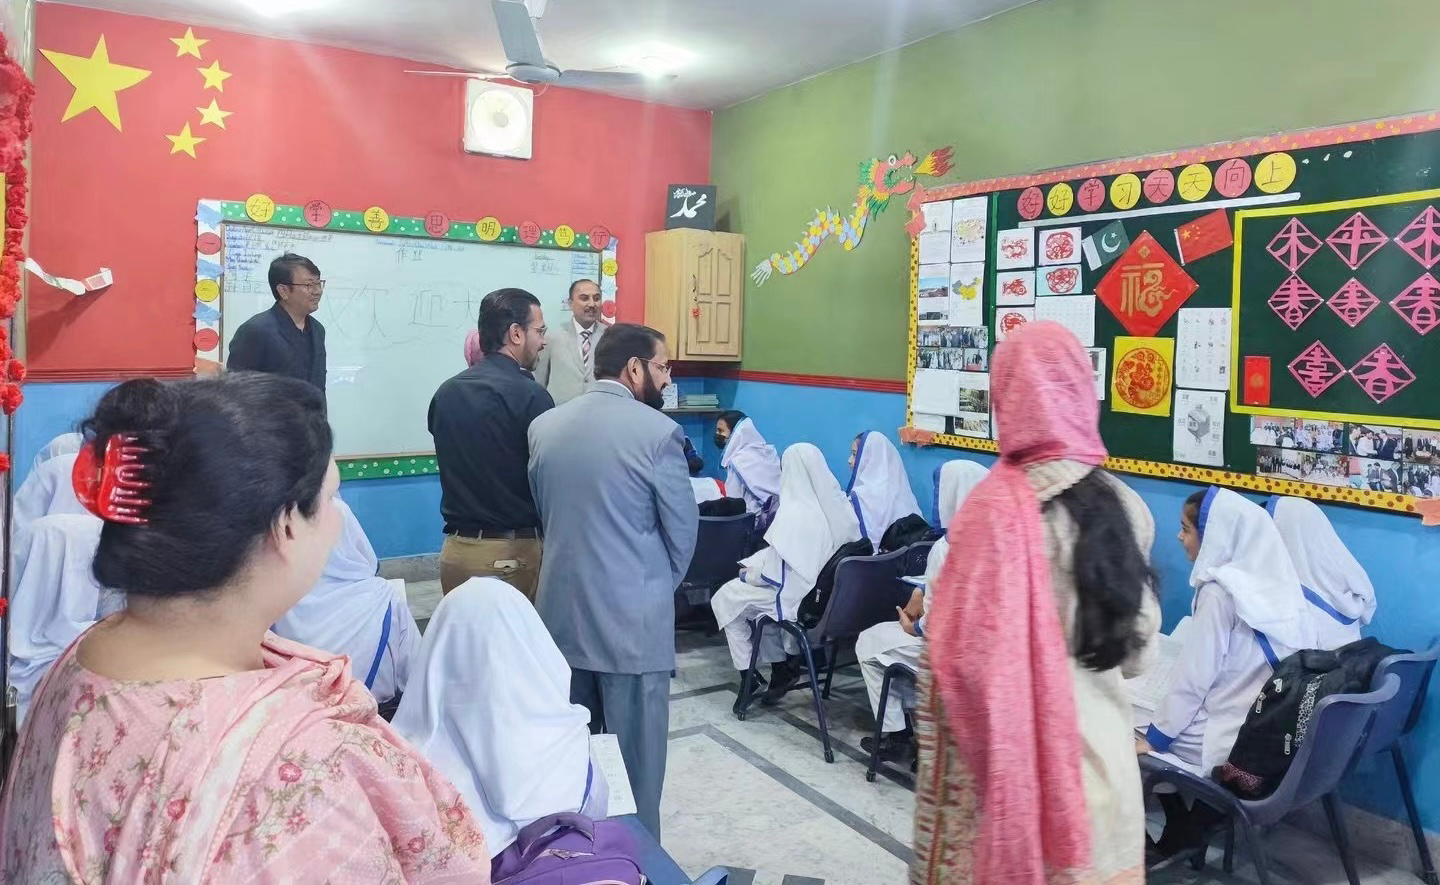 Chinese Education Association in Pakistan Gifted 400 Books to PEAK School